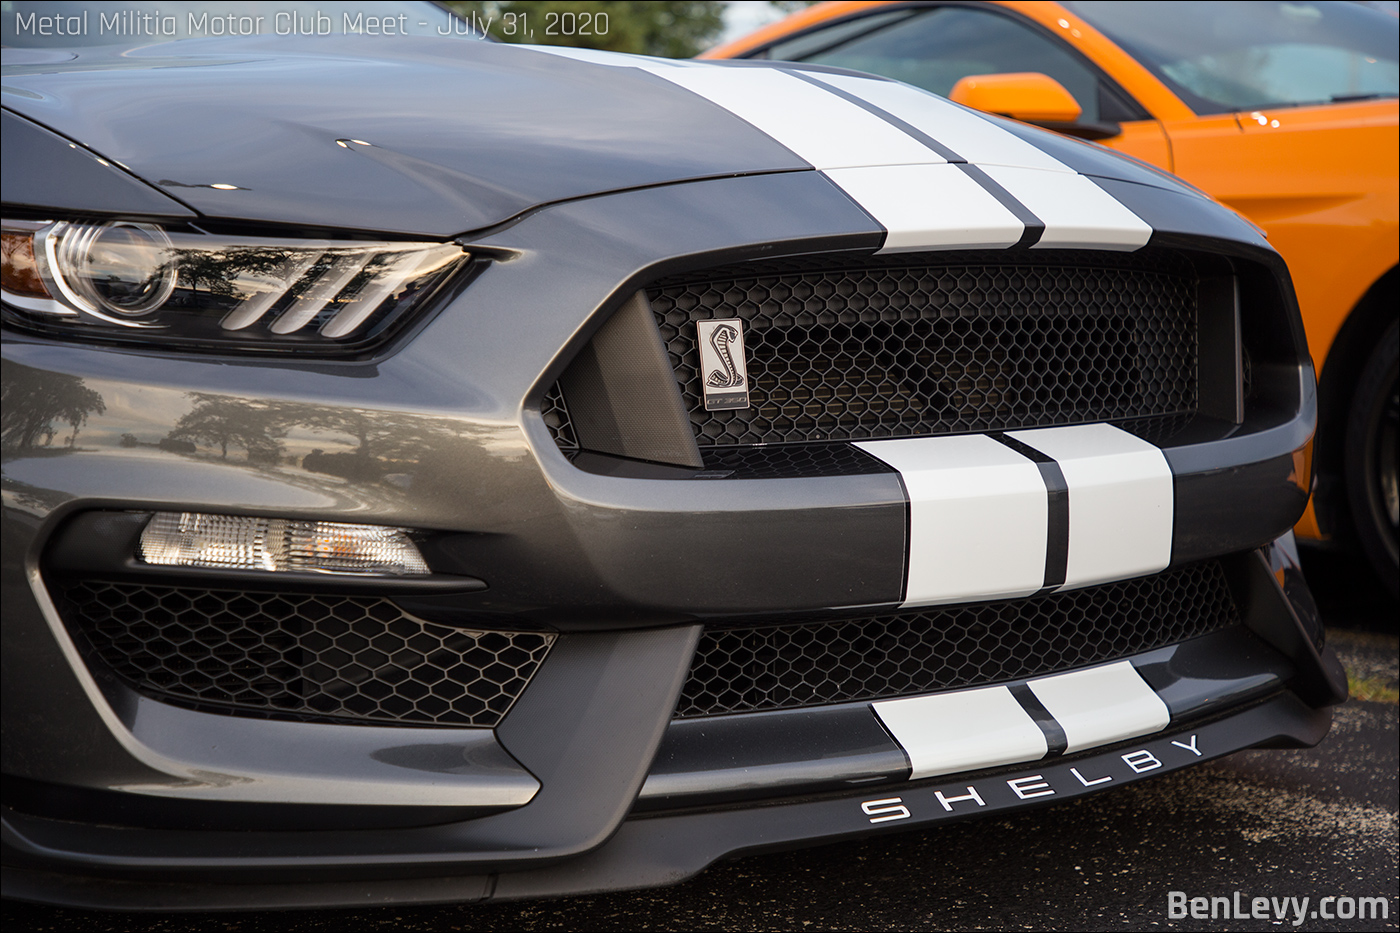 Front grill of a Ford Mustang Shelby GT350